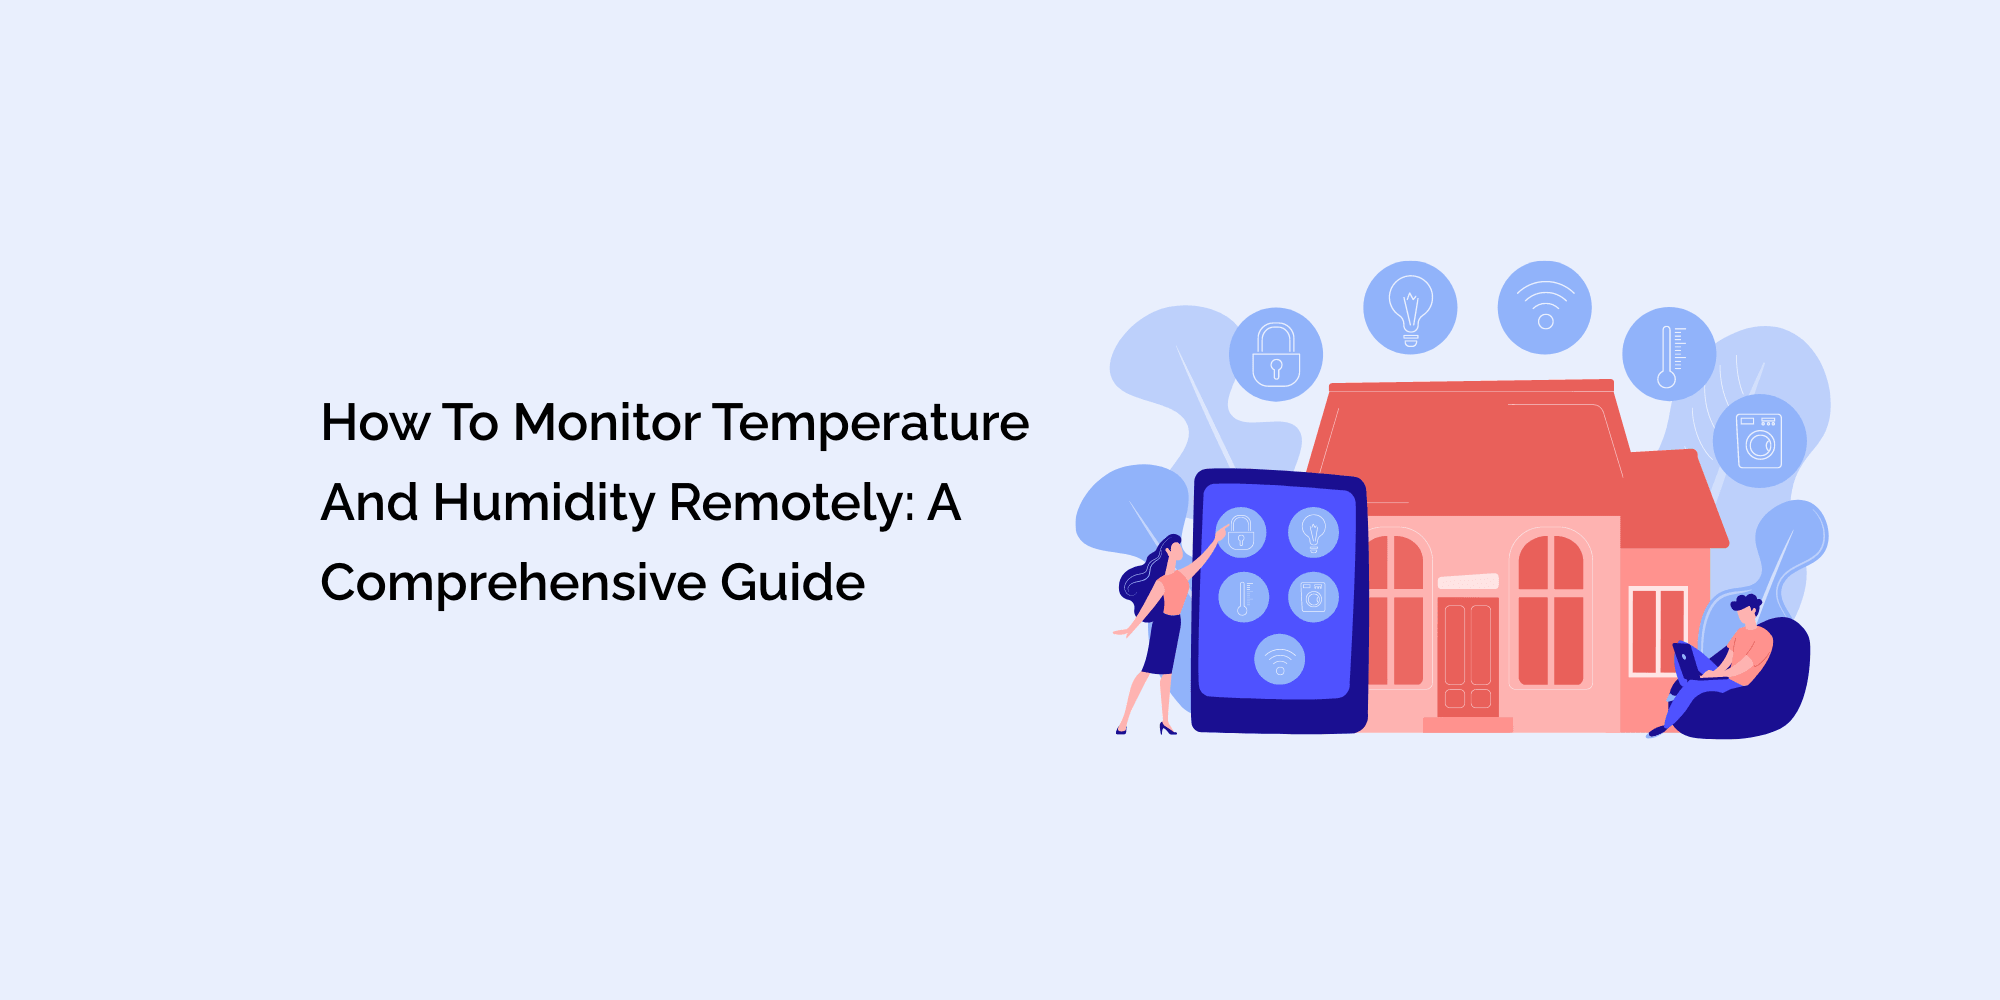 How to Monitor Temperature and Humidity Remotely: A Comprehensive Guide